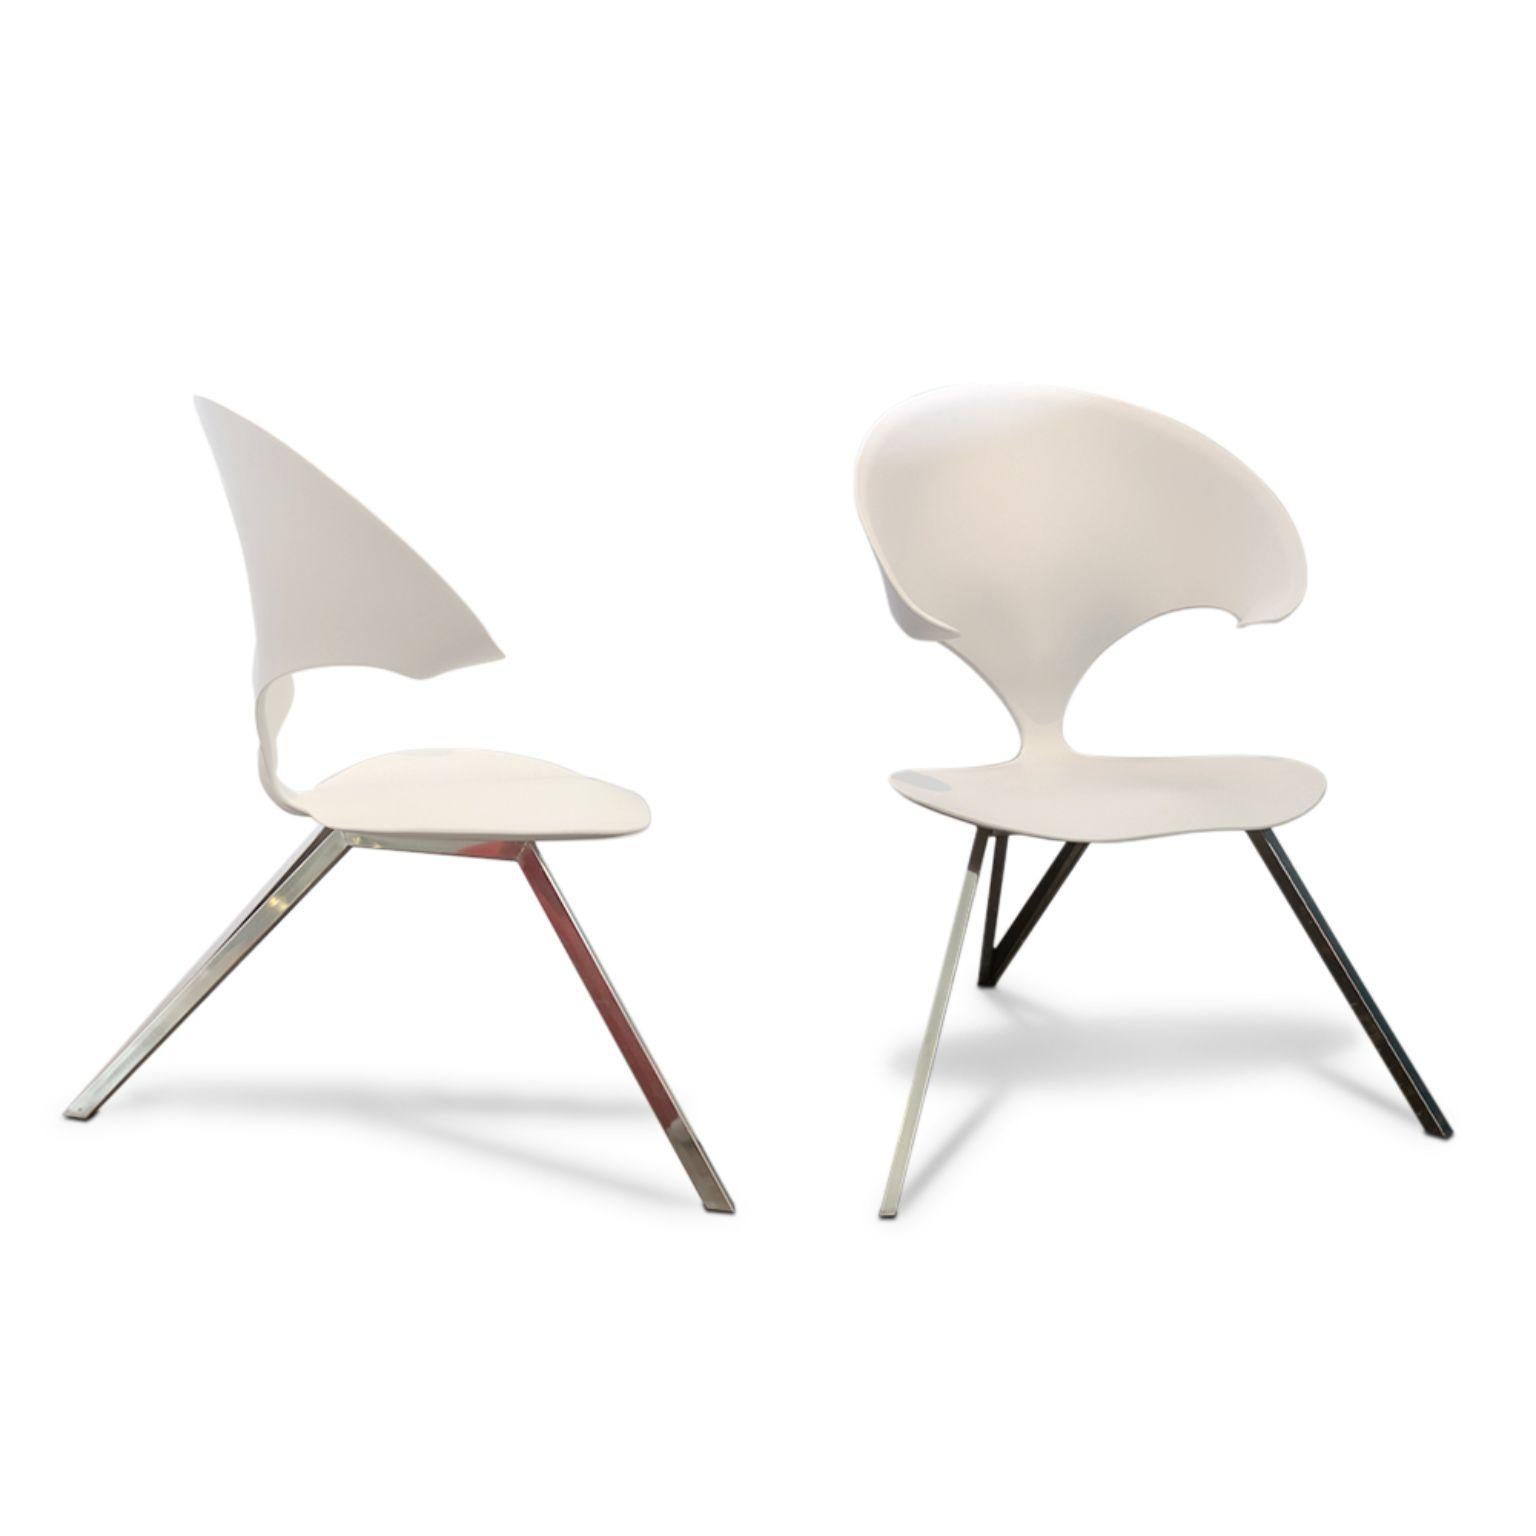 Set of Hedonê chairs by Mameluca
Material: corian, stainless steel
Dimensions: D 65 x W 85 x H 95 cm

The anatomical and physiological studies allowed the discovery that the clitoris was not only richer in nerve endings but also more